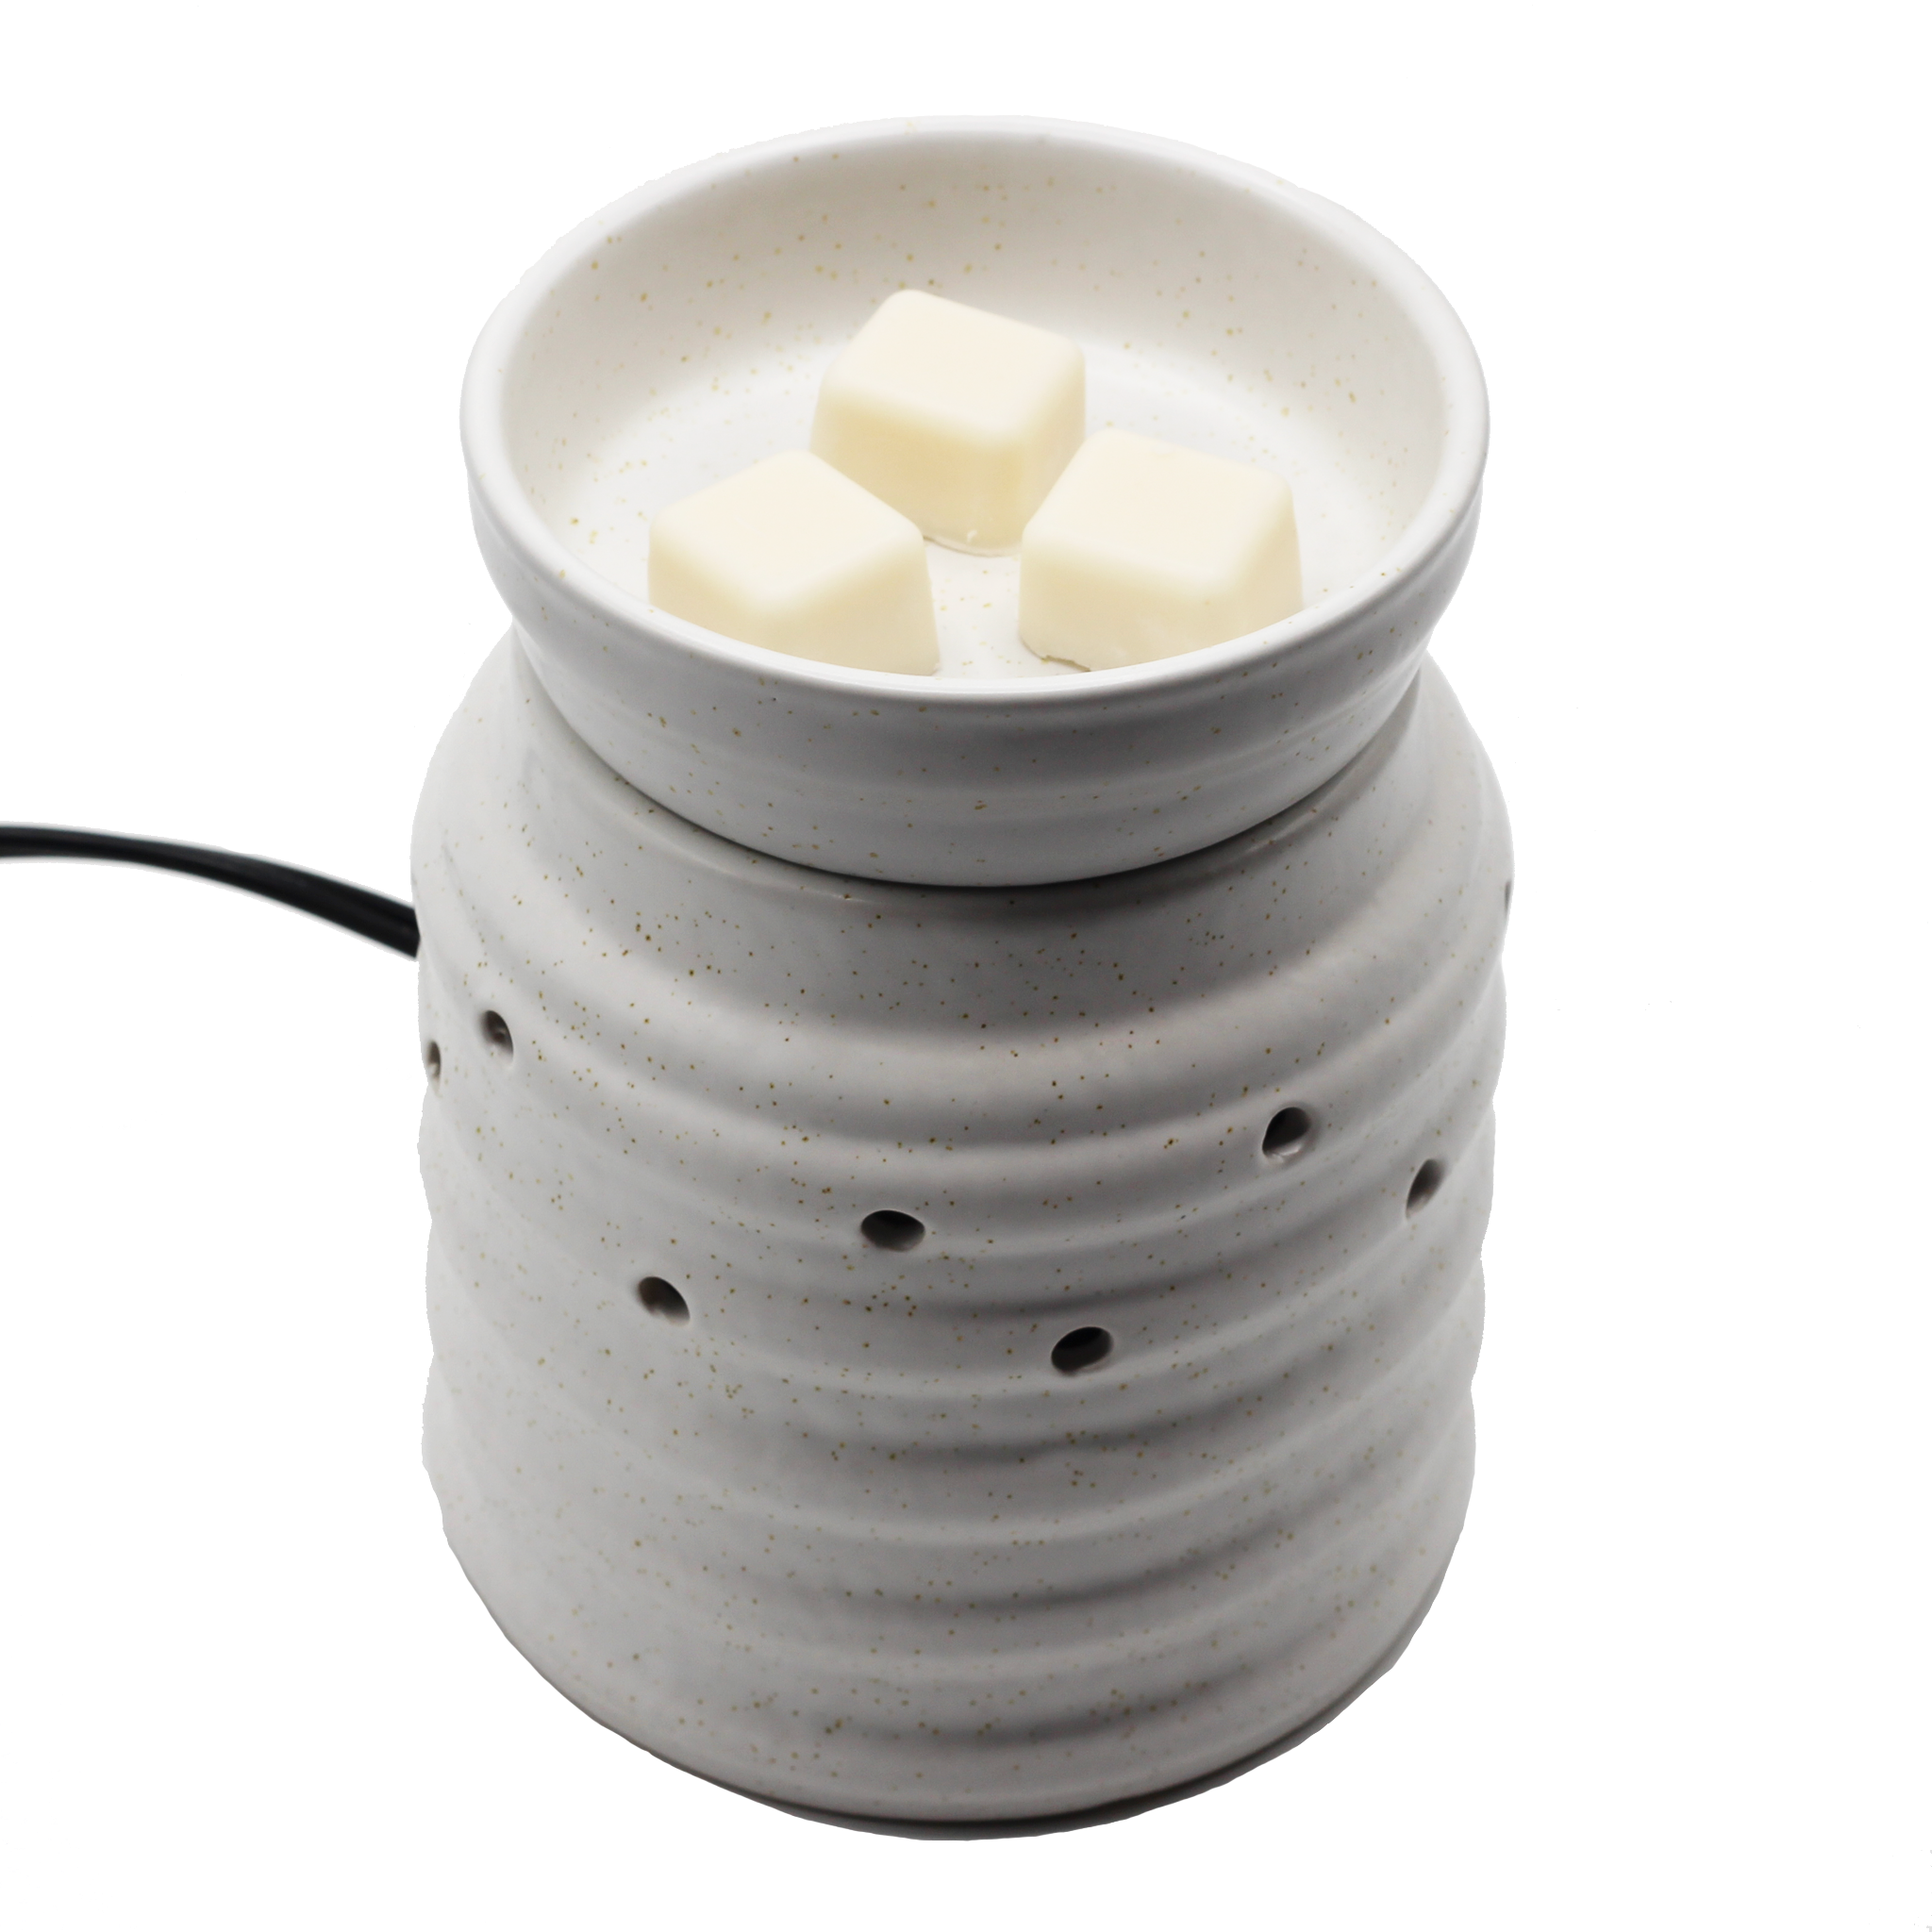 Concrete Style Electric Wax Warmer – Miller Farm Candle Co